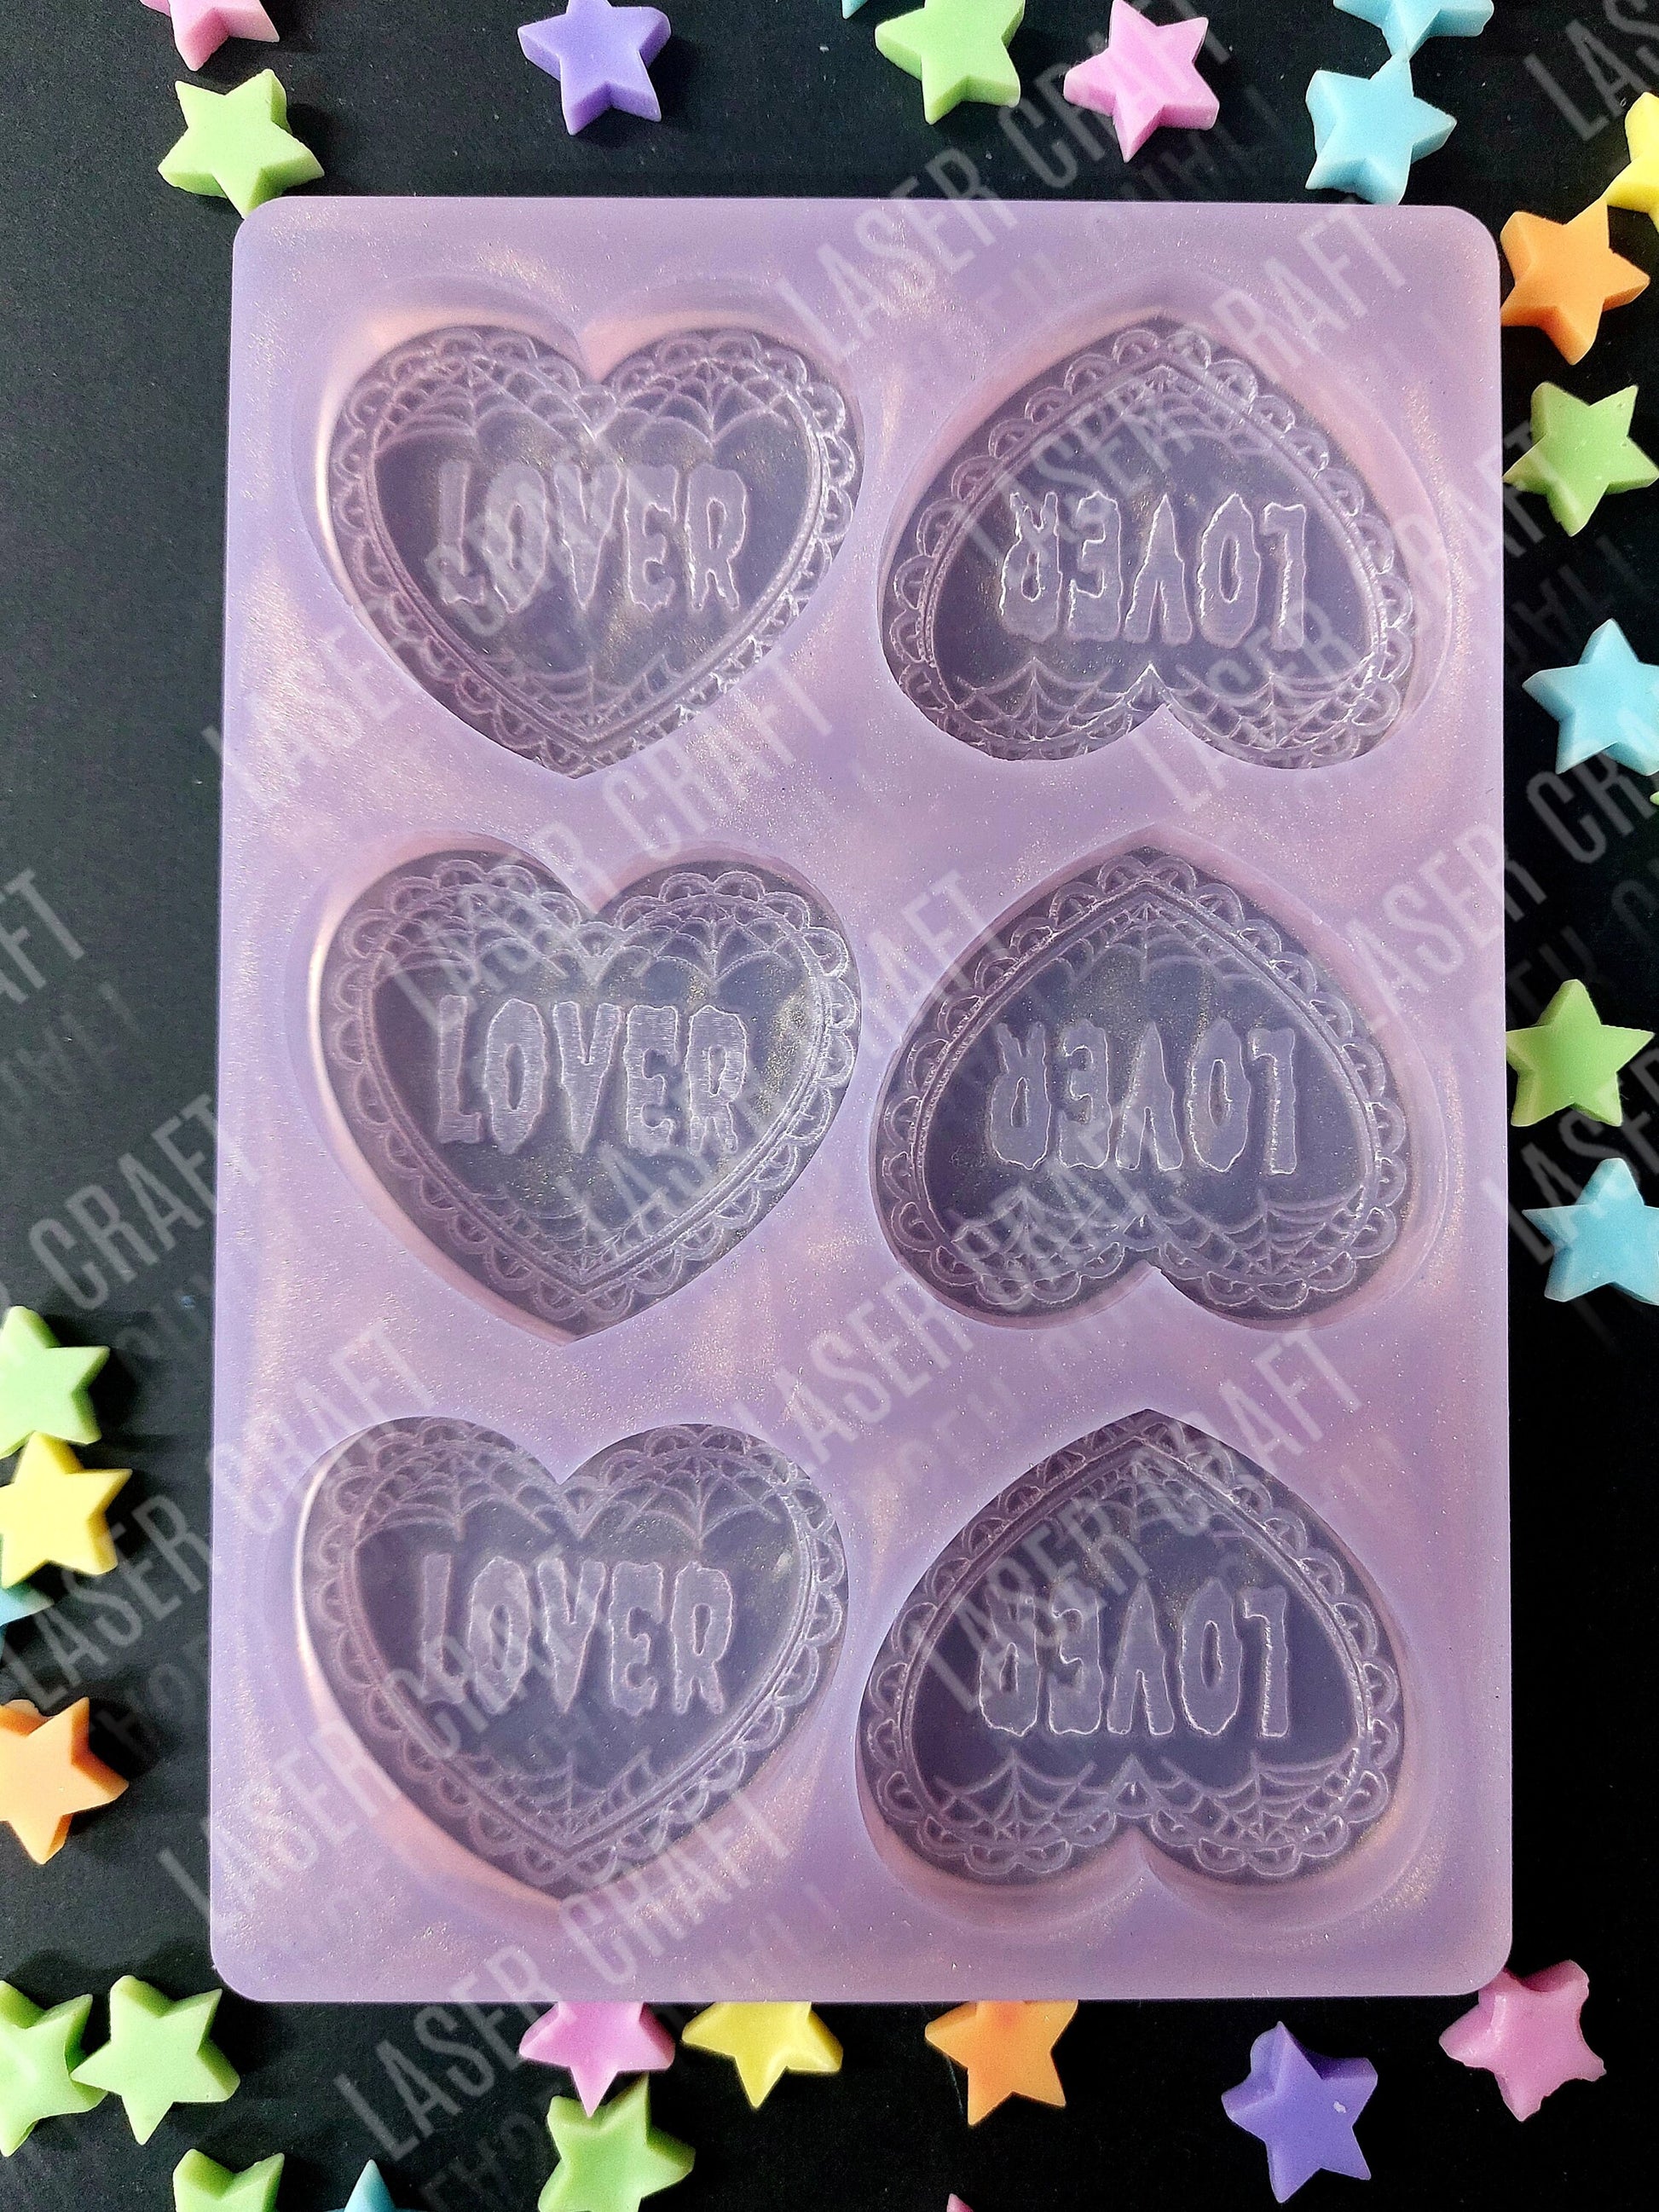 Spooky Lover Heart 6 Cell Silicone Mould for wax, resin, soap